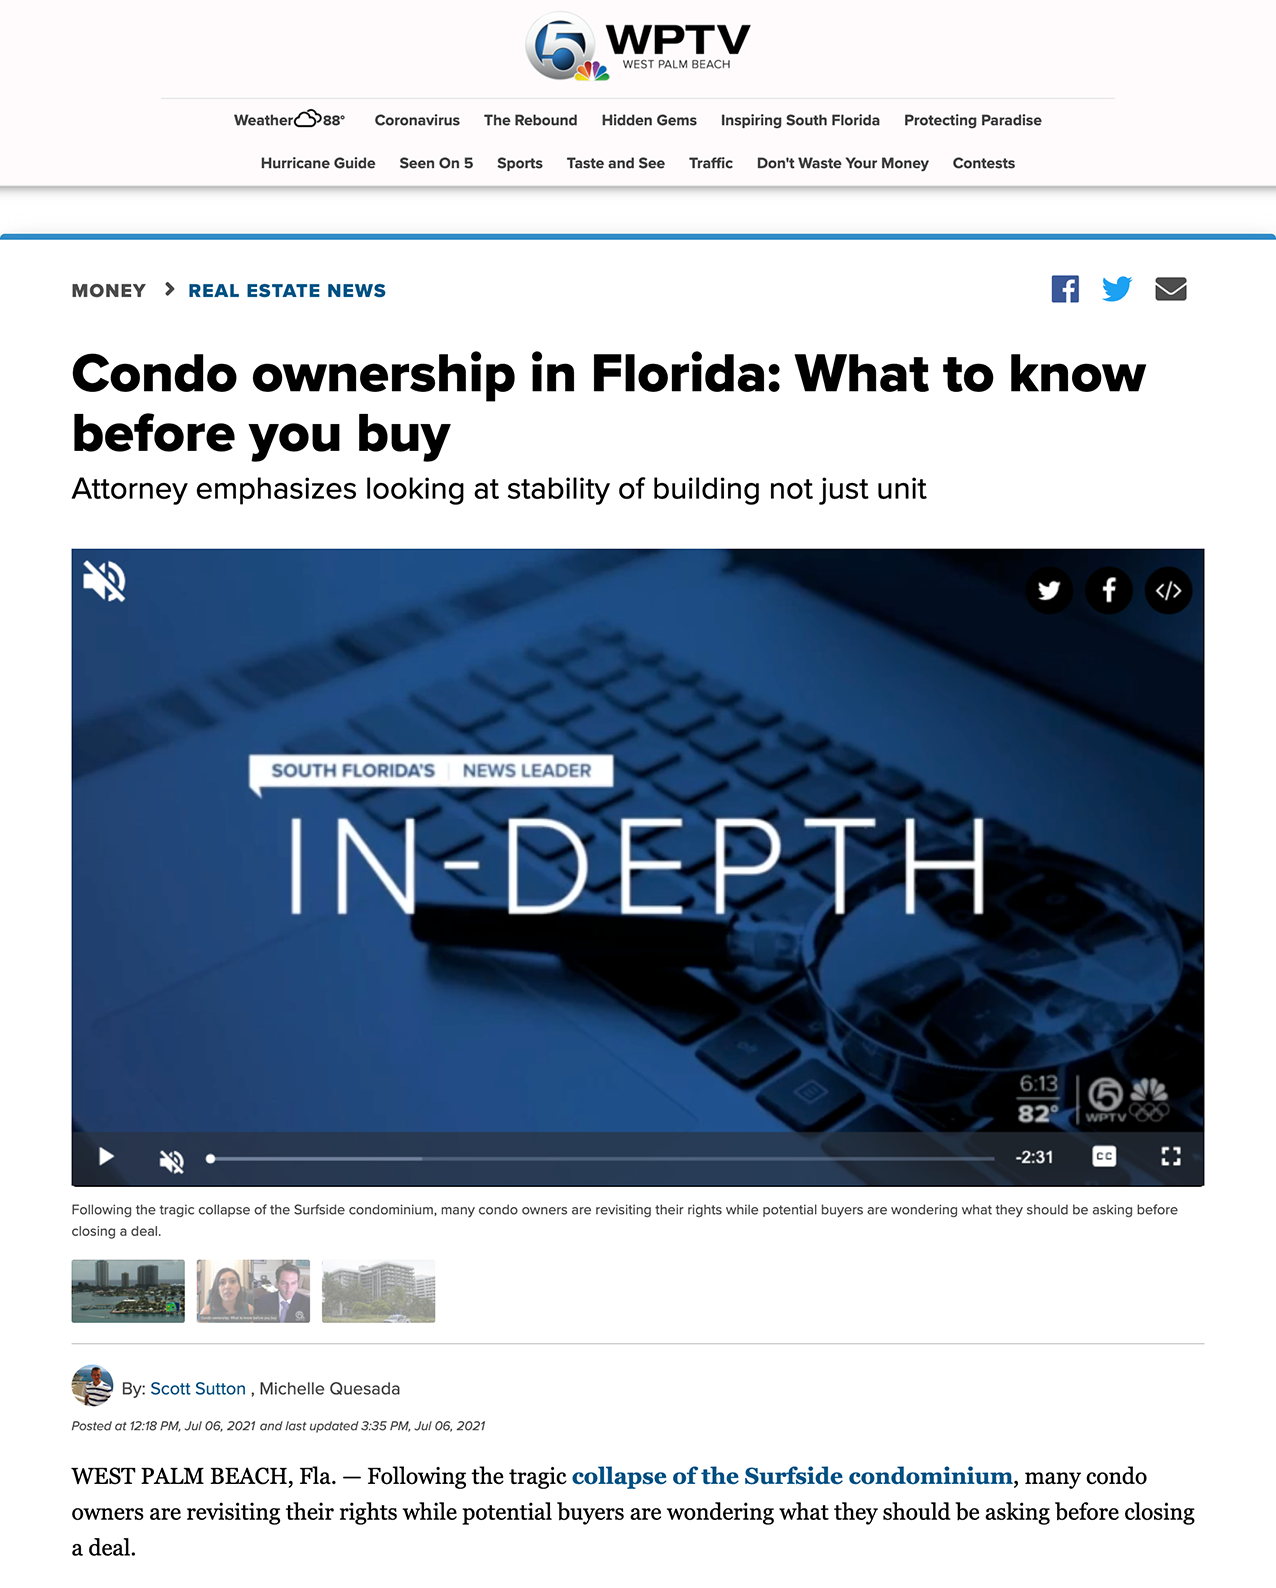 Condo ownership in Florida: What to know before you buy